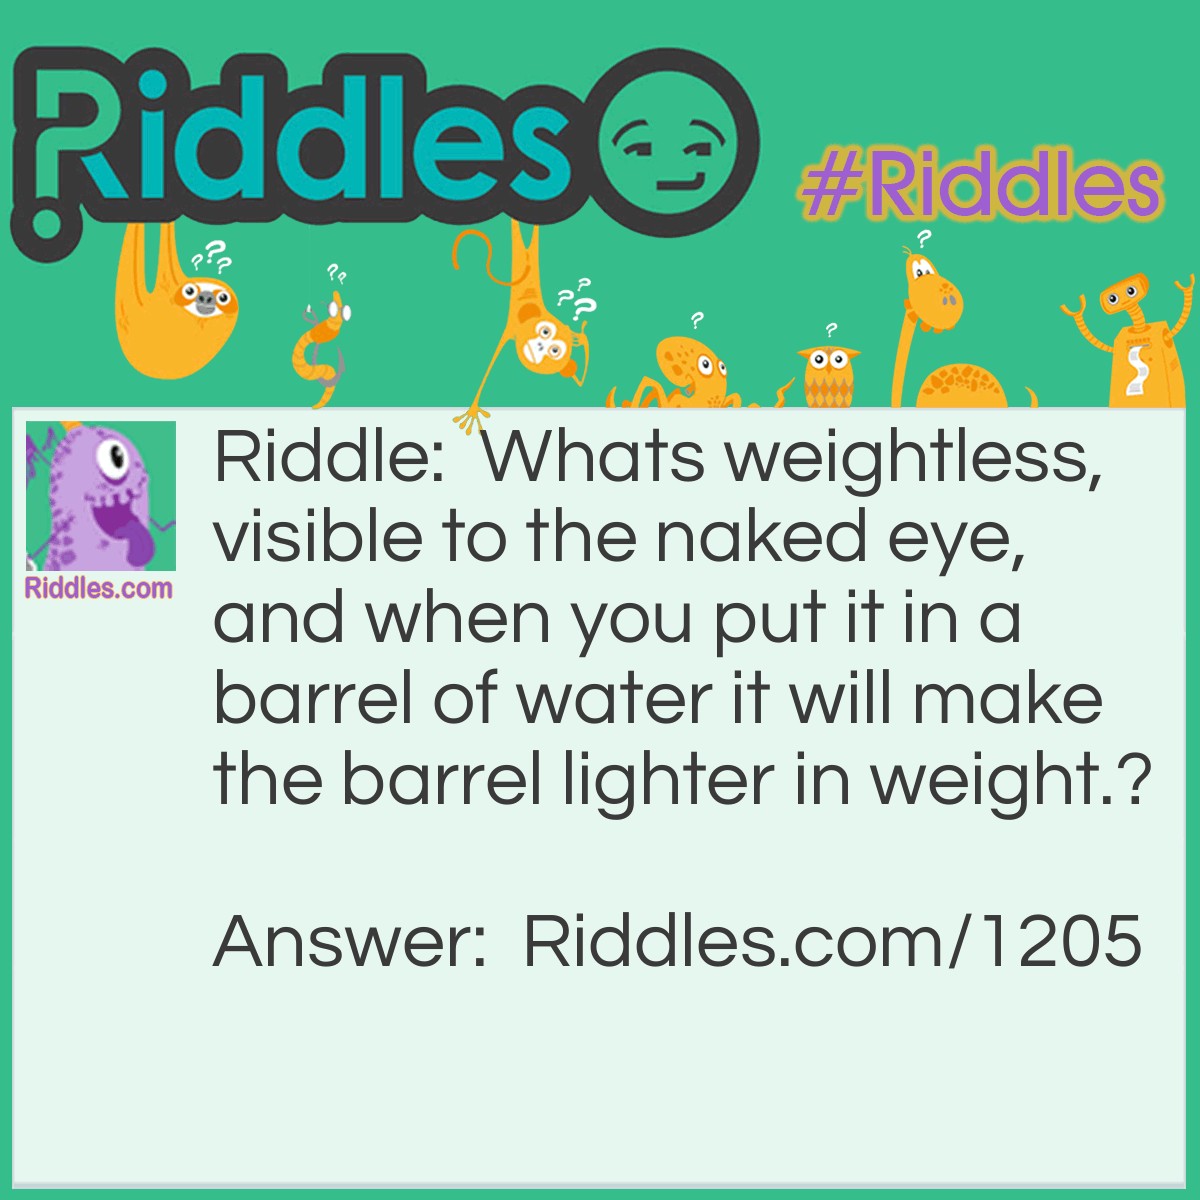 Riddle: Whats weightless, visible to the naked eye, and when you put it in a barrel of water it will make the barrel lighter in weight.? Answer: A hole!!!!!!!